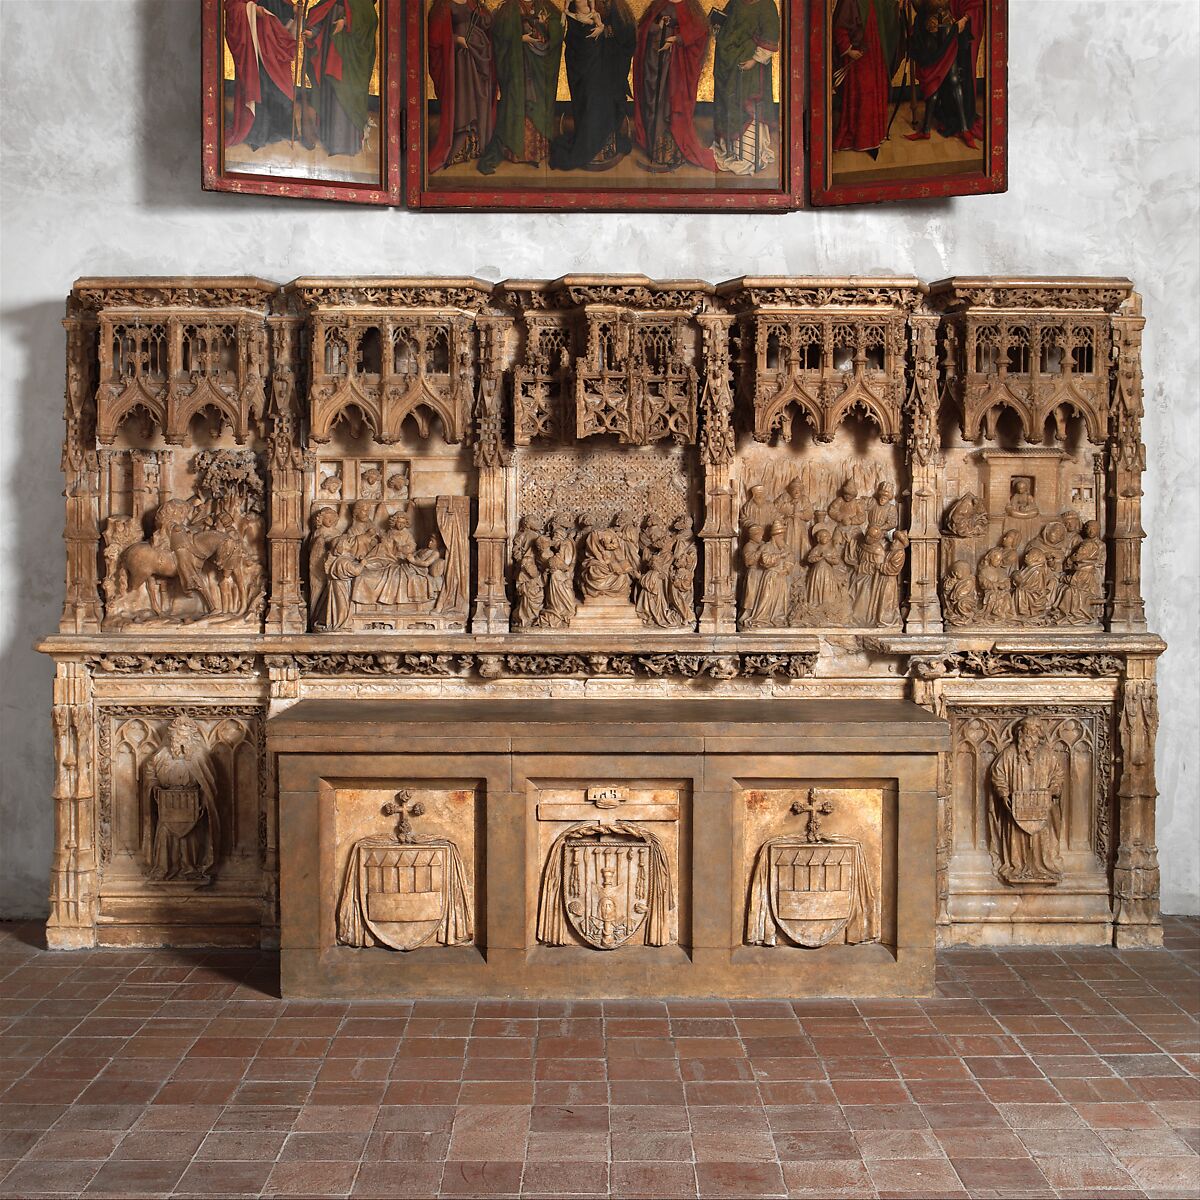 Altar Predella and Socle of Archbishop Don Dalmau de Mur y Cervelló, Francí Gomar (Spanish, Aragon, active by 1443–died ca. 1492/3), Alabaster with traces of paint and gilding, Spanish 